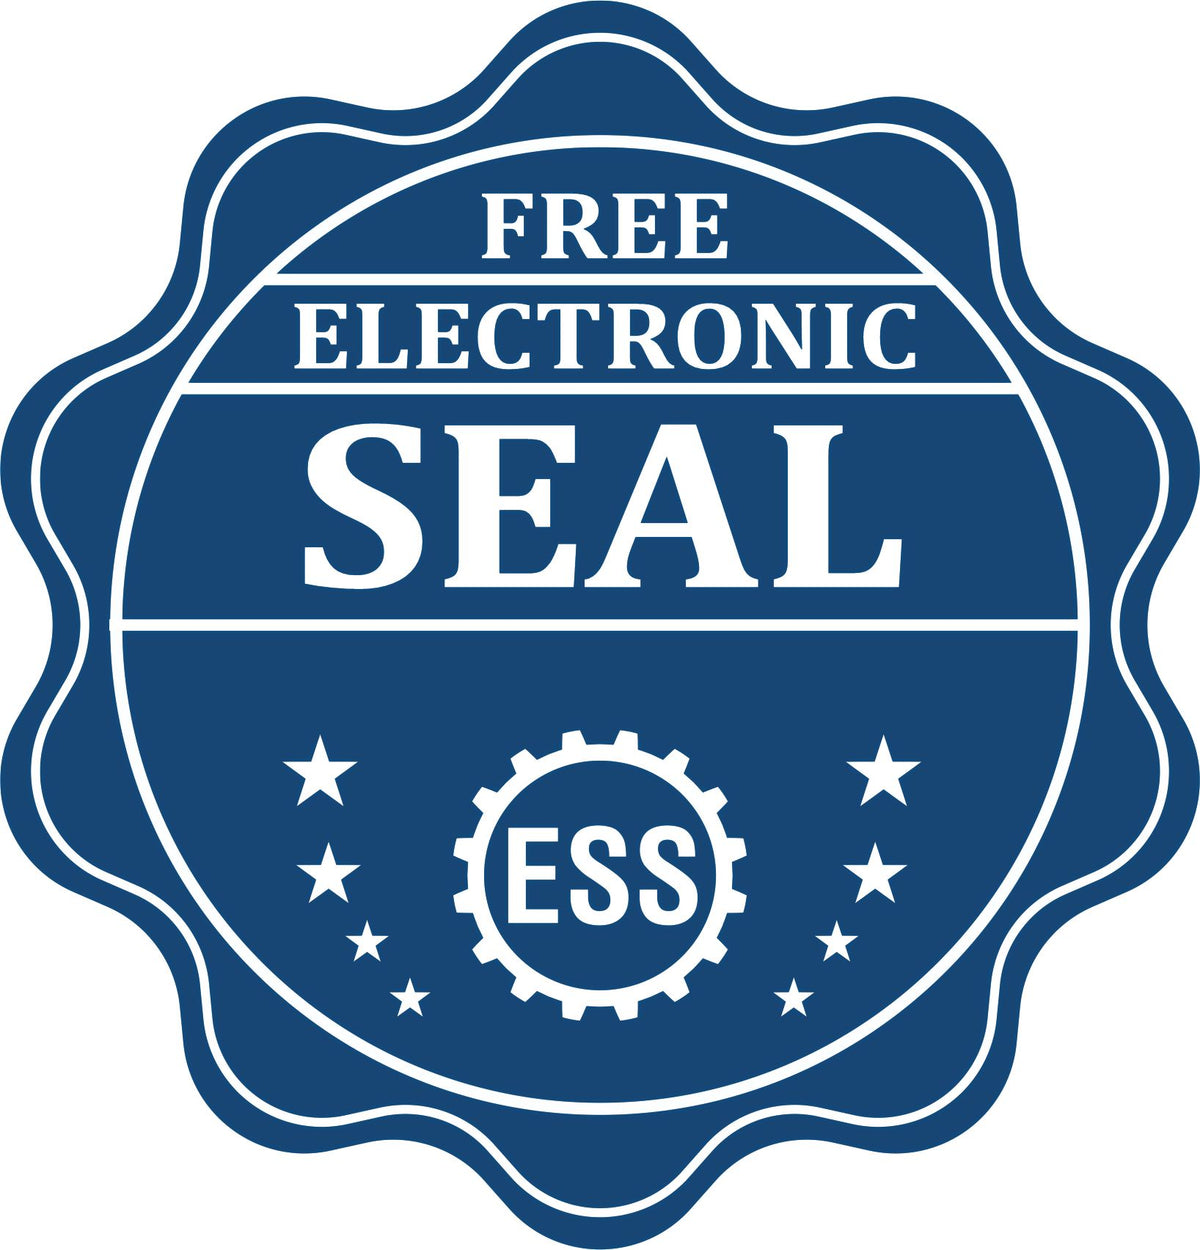 A badge showing a free electronic seal for the Premium MaxLight Pre-Inked Hawaii Engineering Stamp with stars and the ESS gear on the emblem.